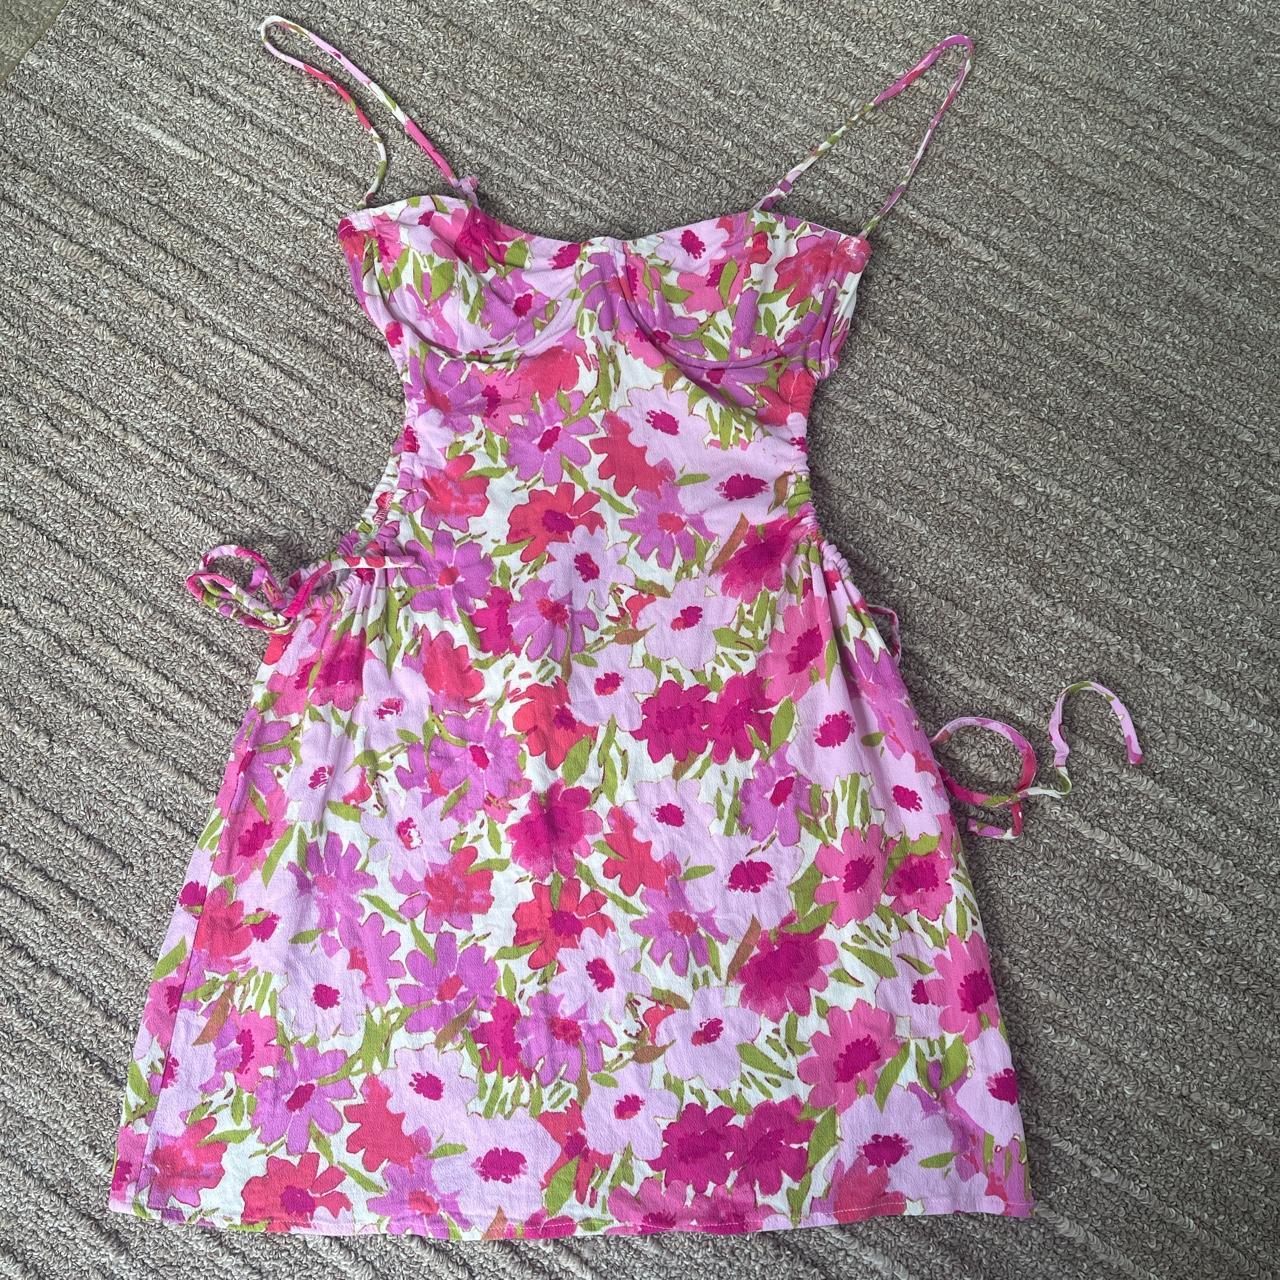 Isabelle's Cabinet Women's Pink and Green Dress | Depop